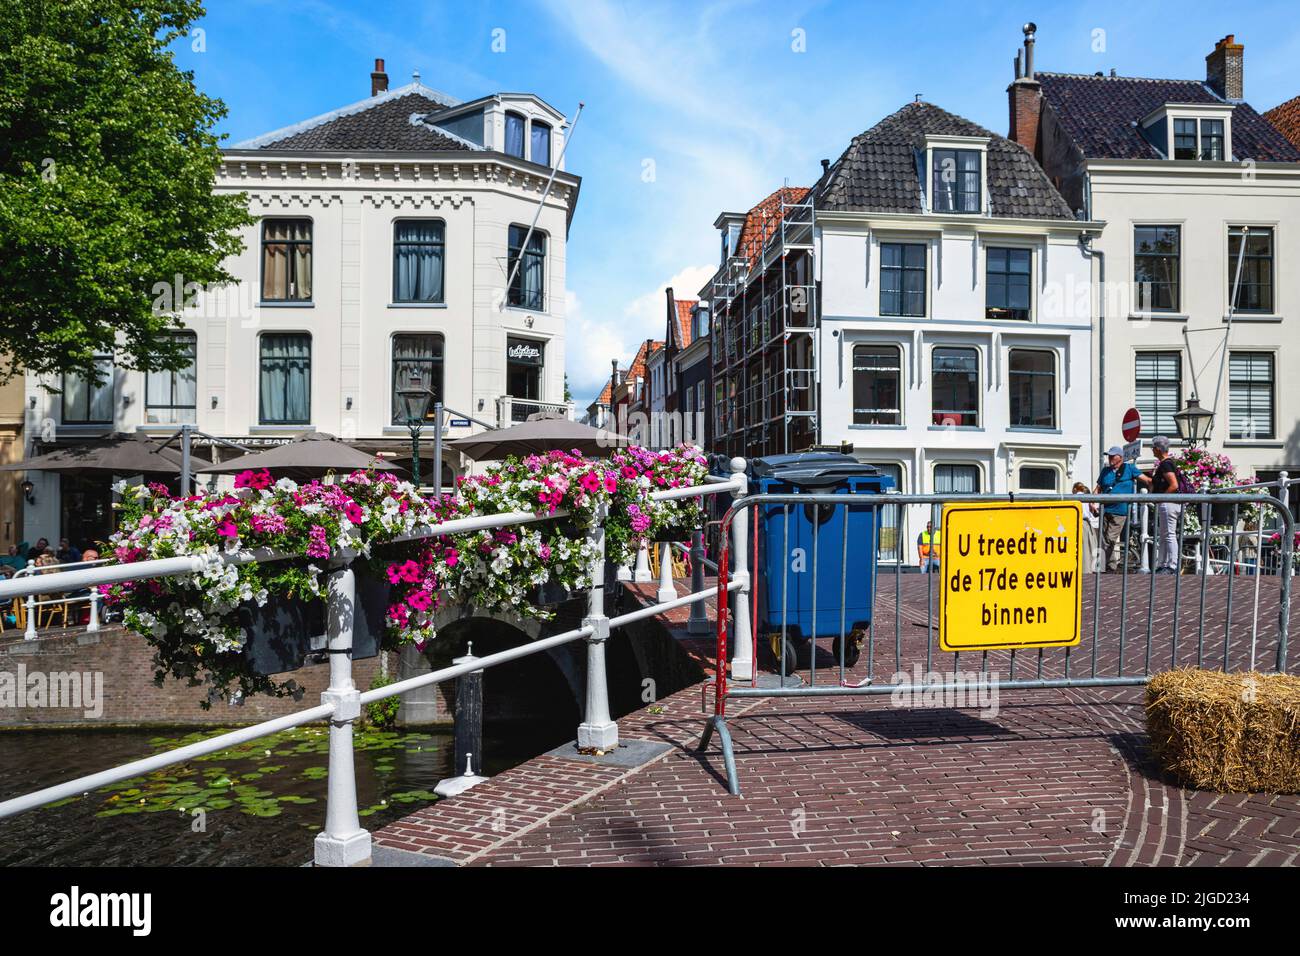 Rembrandt van Rijn festival in the historic center of Leiden, South Holland, Netherlands. Sign: You are now entering the 17th century. Stock Photo